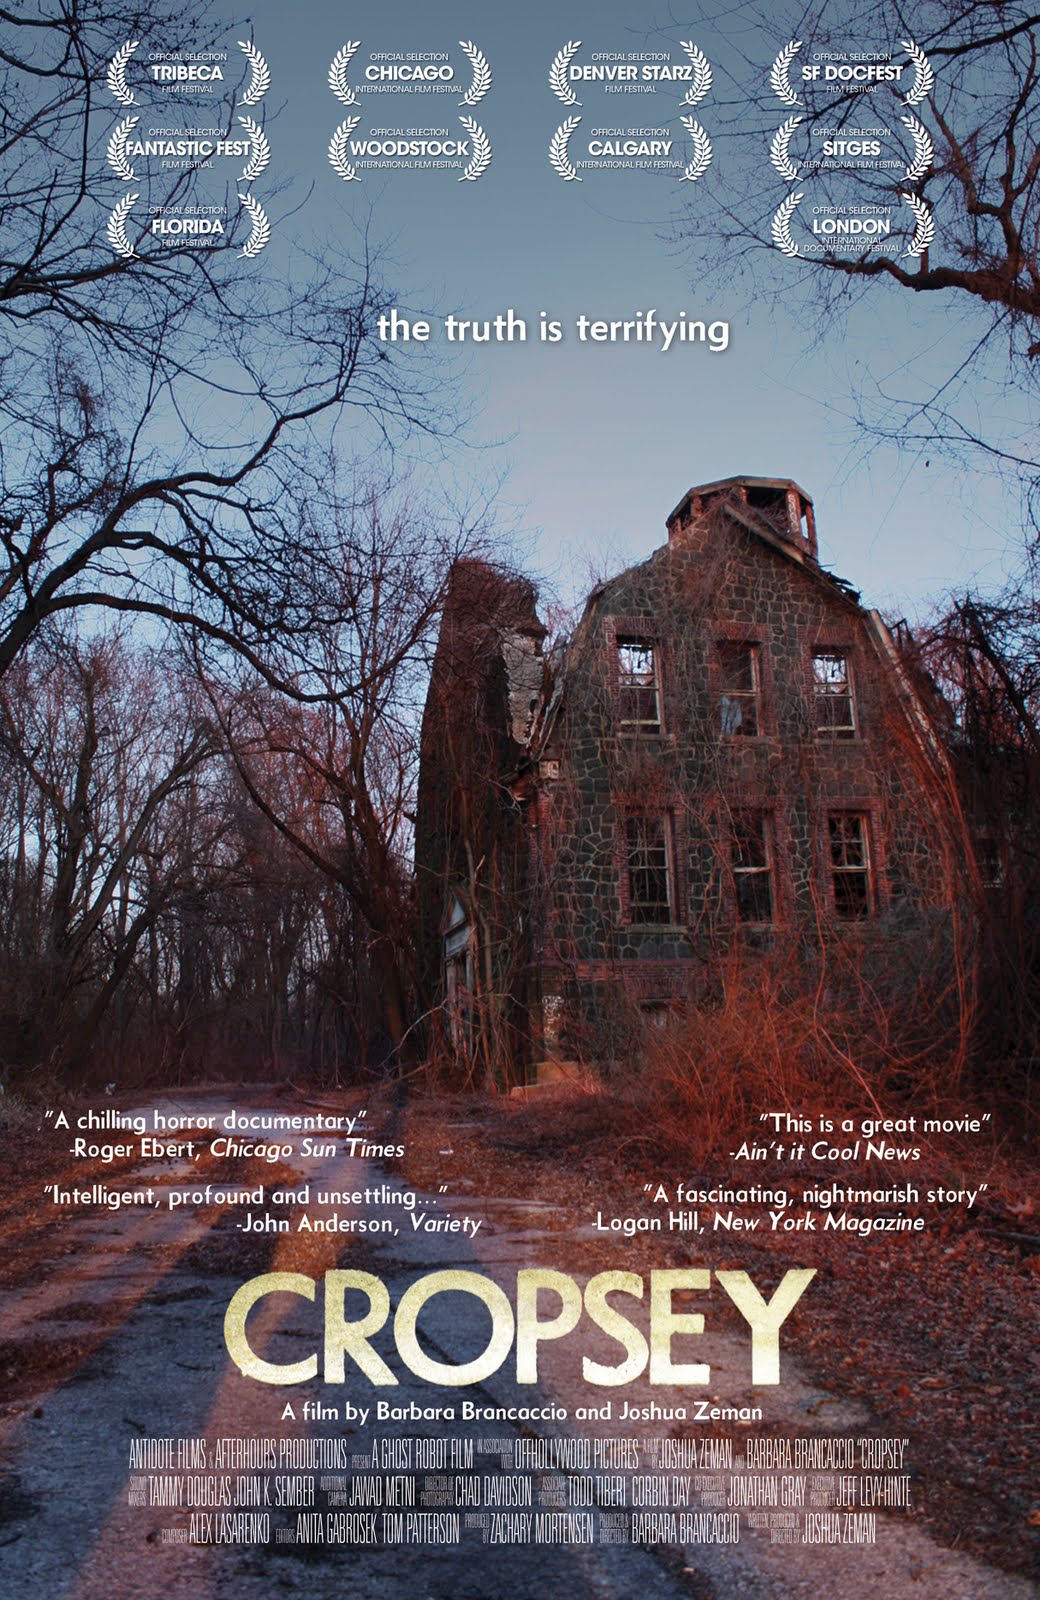 The+burning+cropsey